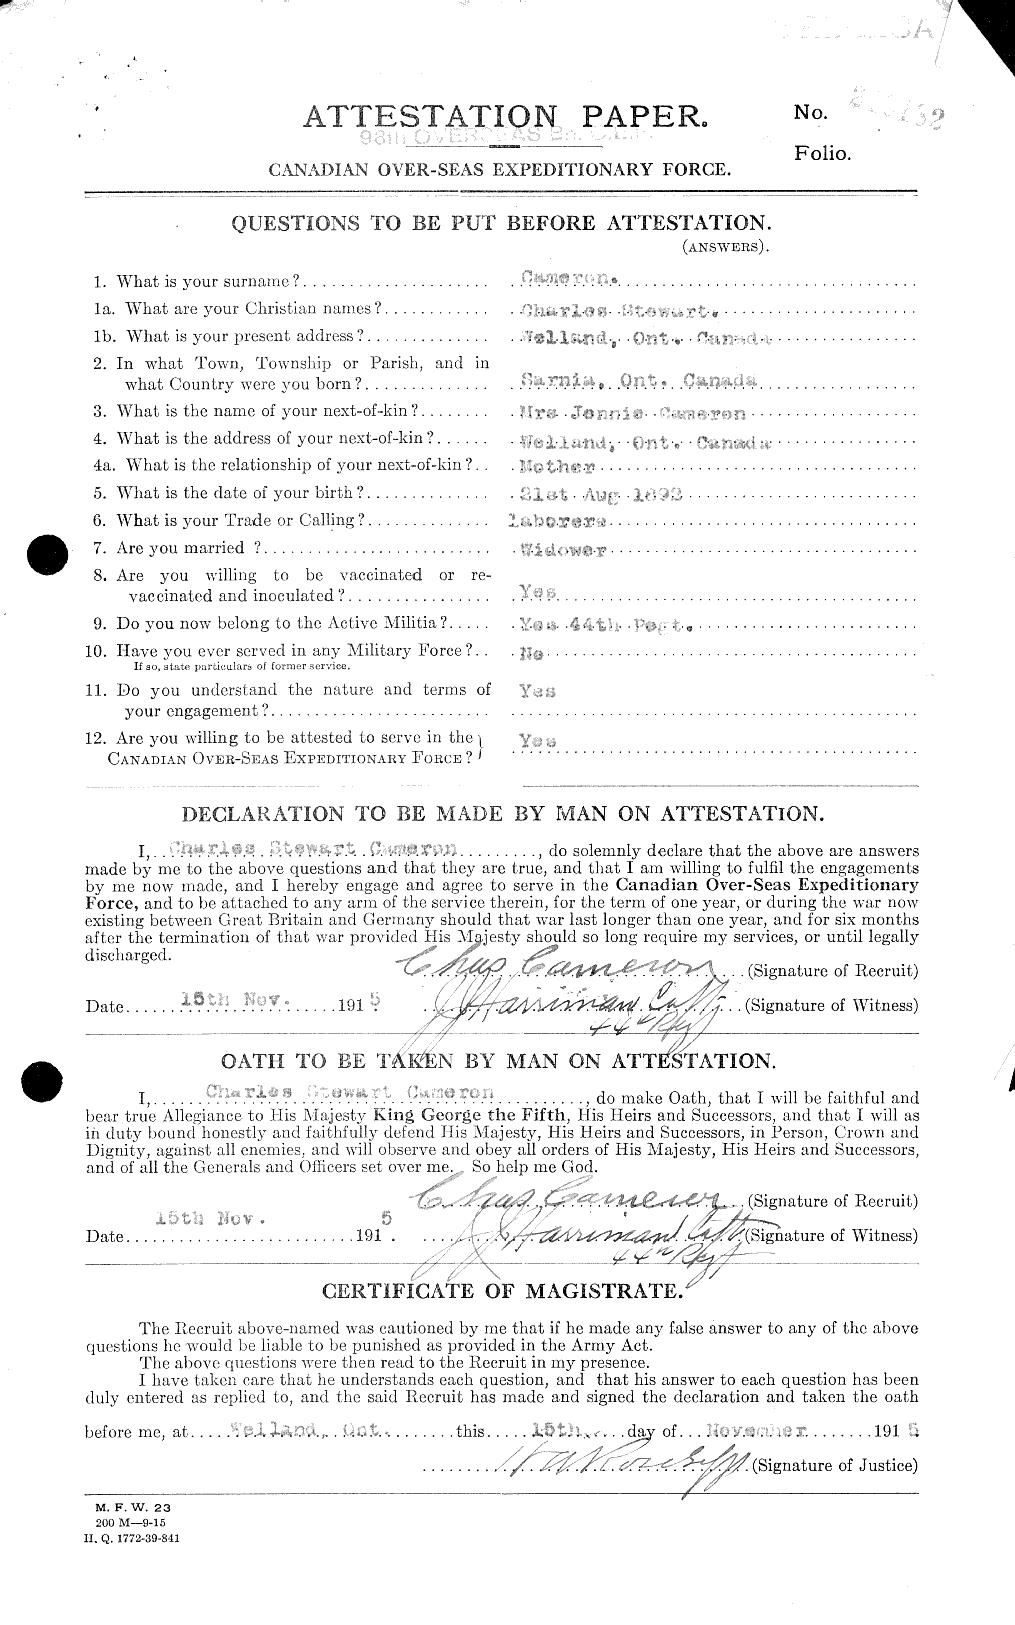 Personnel Records of the First World War - CEF 002625a